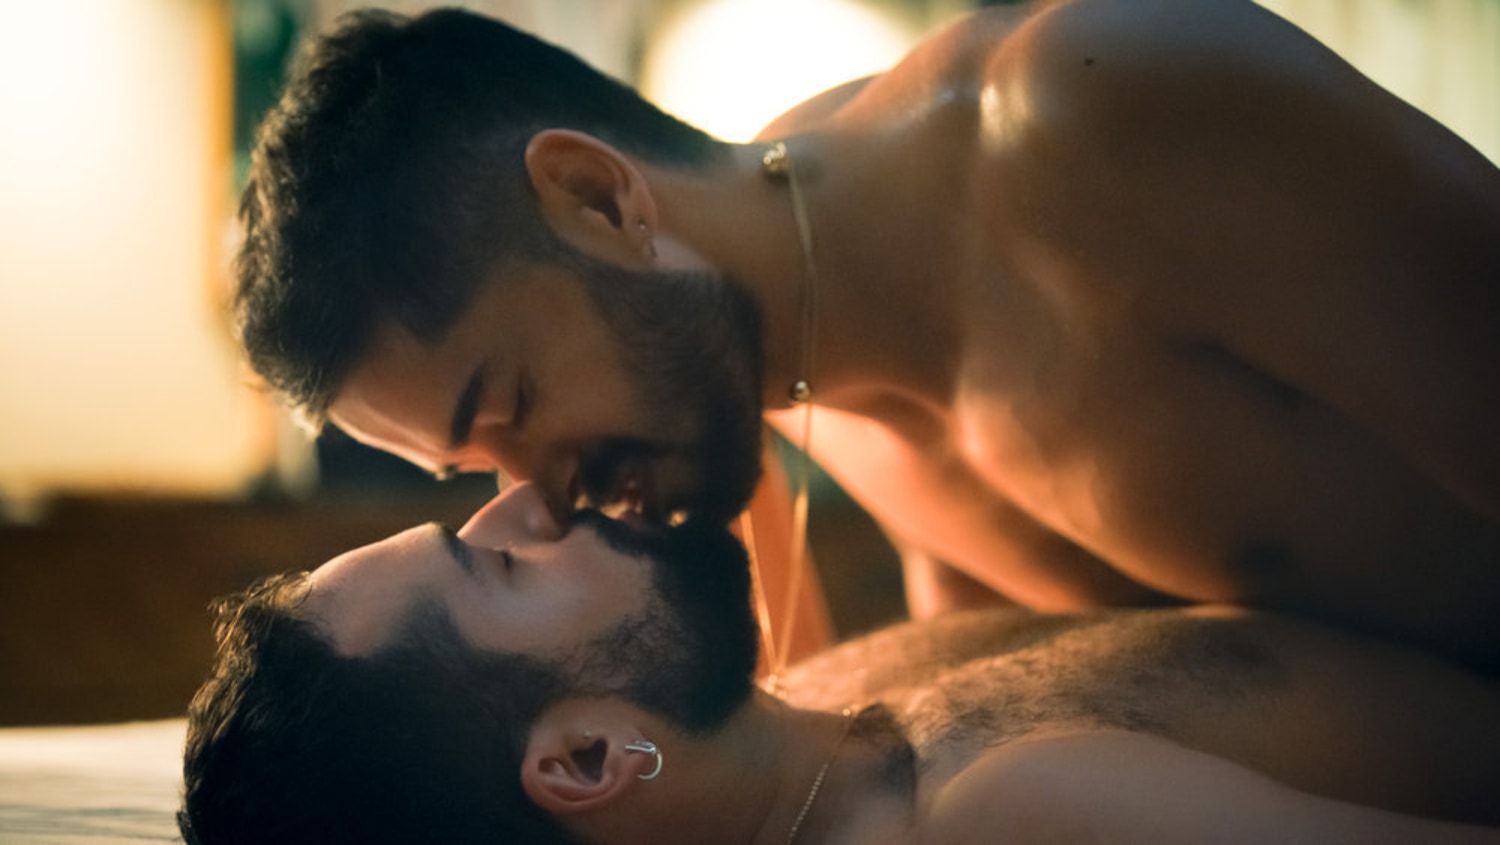 Hot Folk A Sex Blue Film - The 'Queer as Folk' Reboot Is Unapologetic About Queer Sex